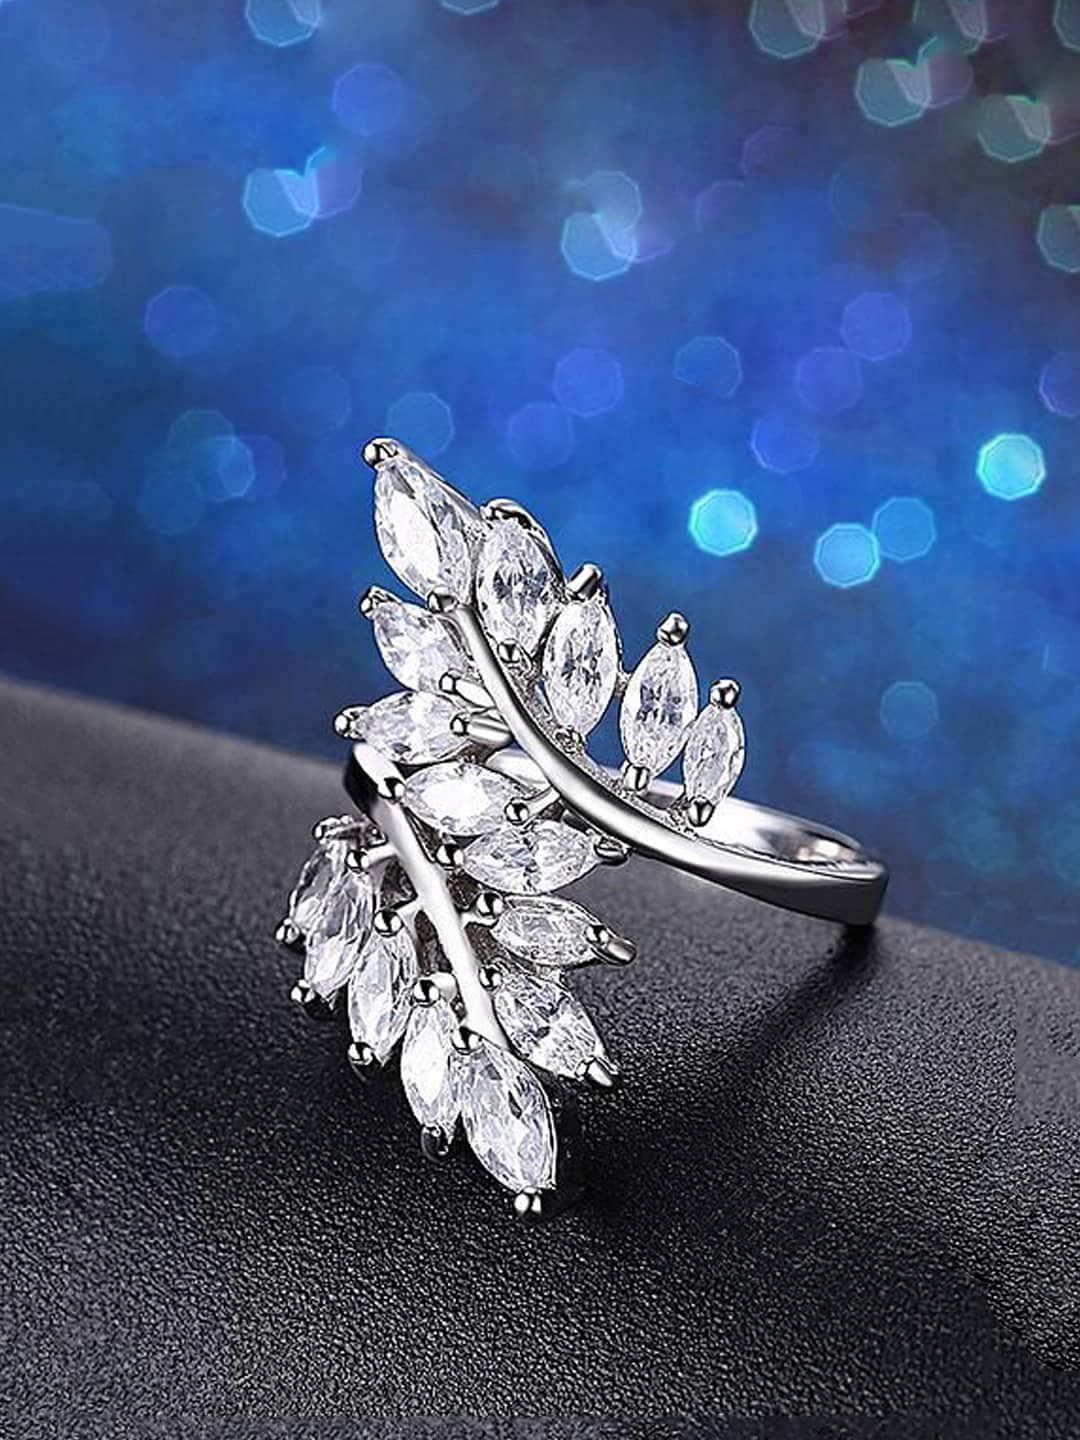 Yellow Chimes Silver-Toned White Crystal-Studded Finger Ring Price in India